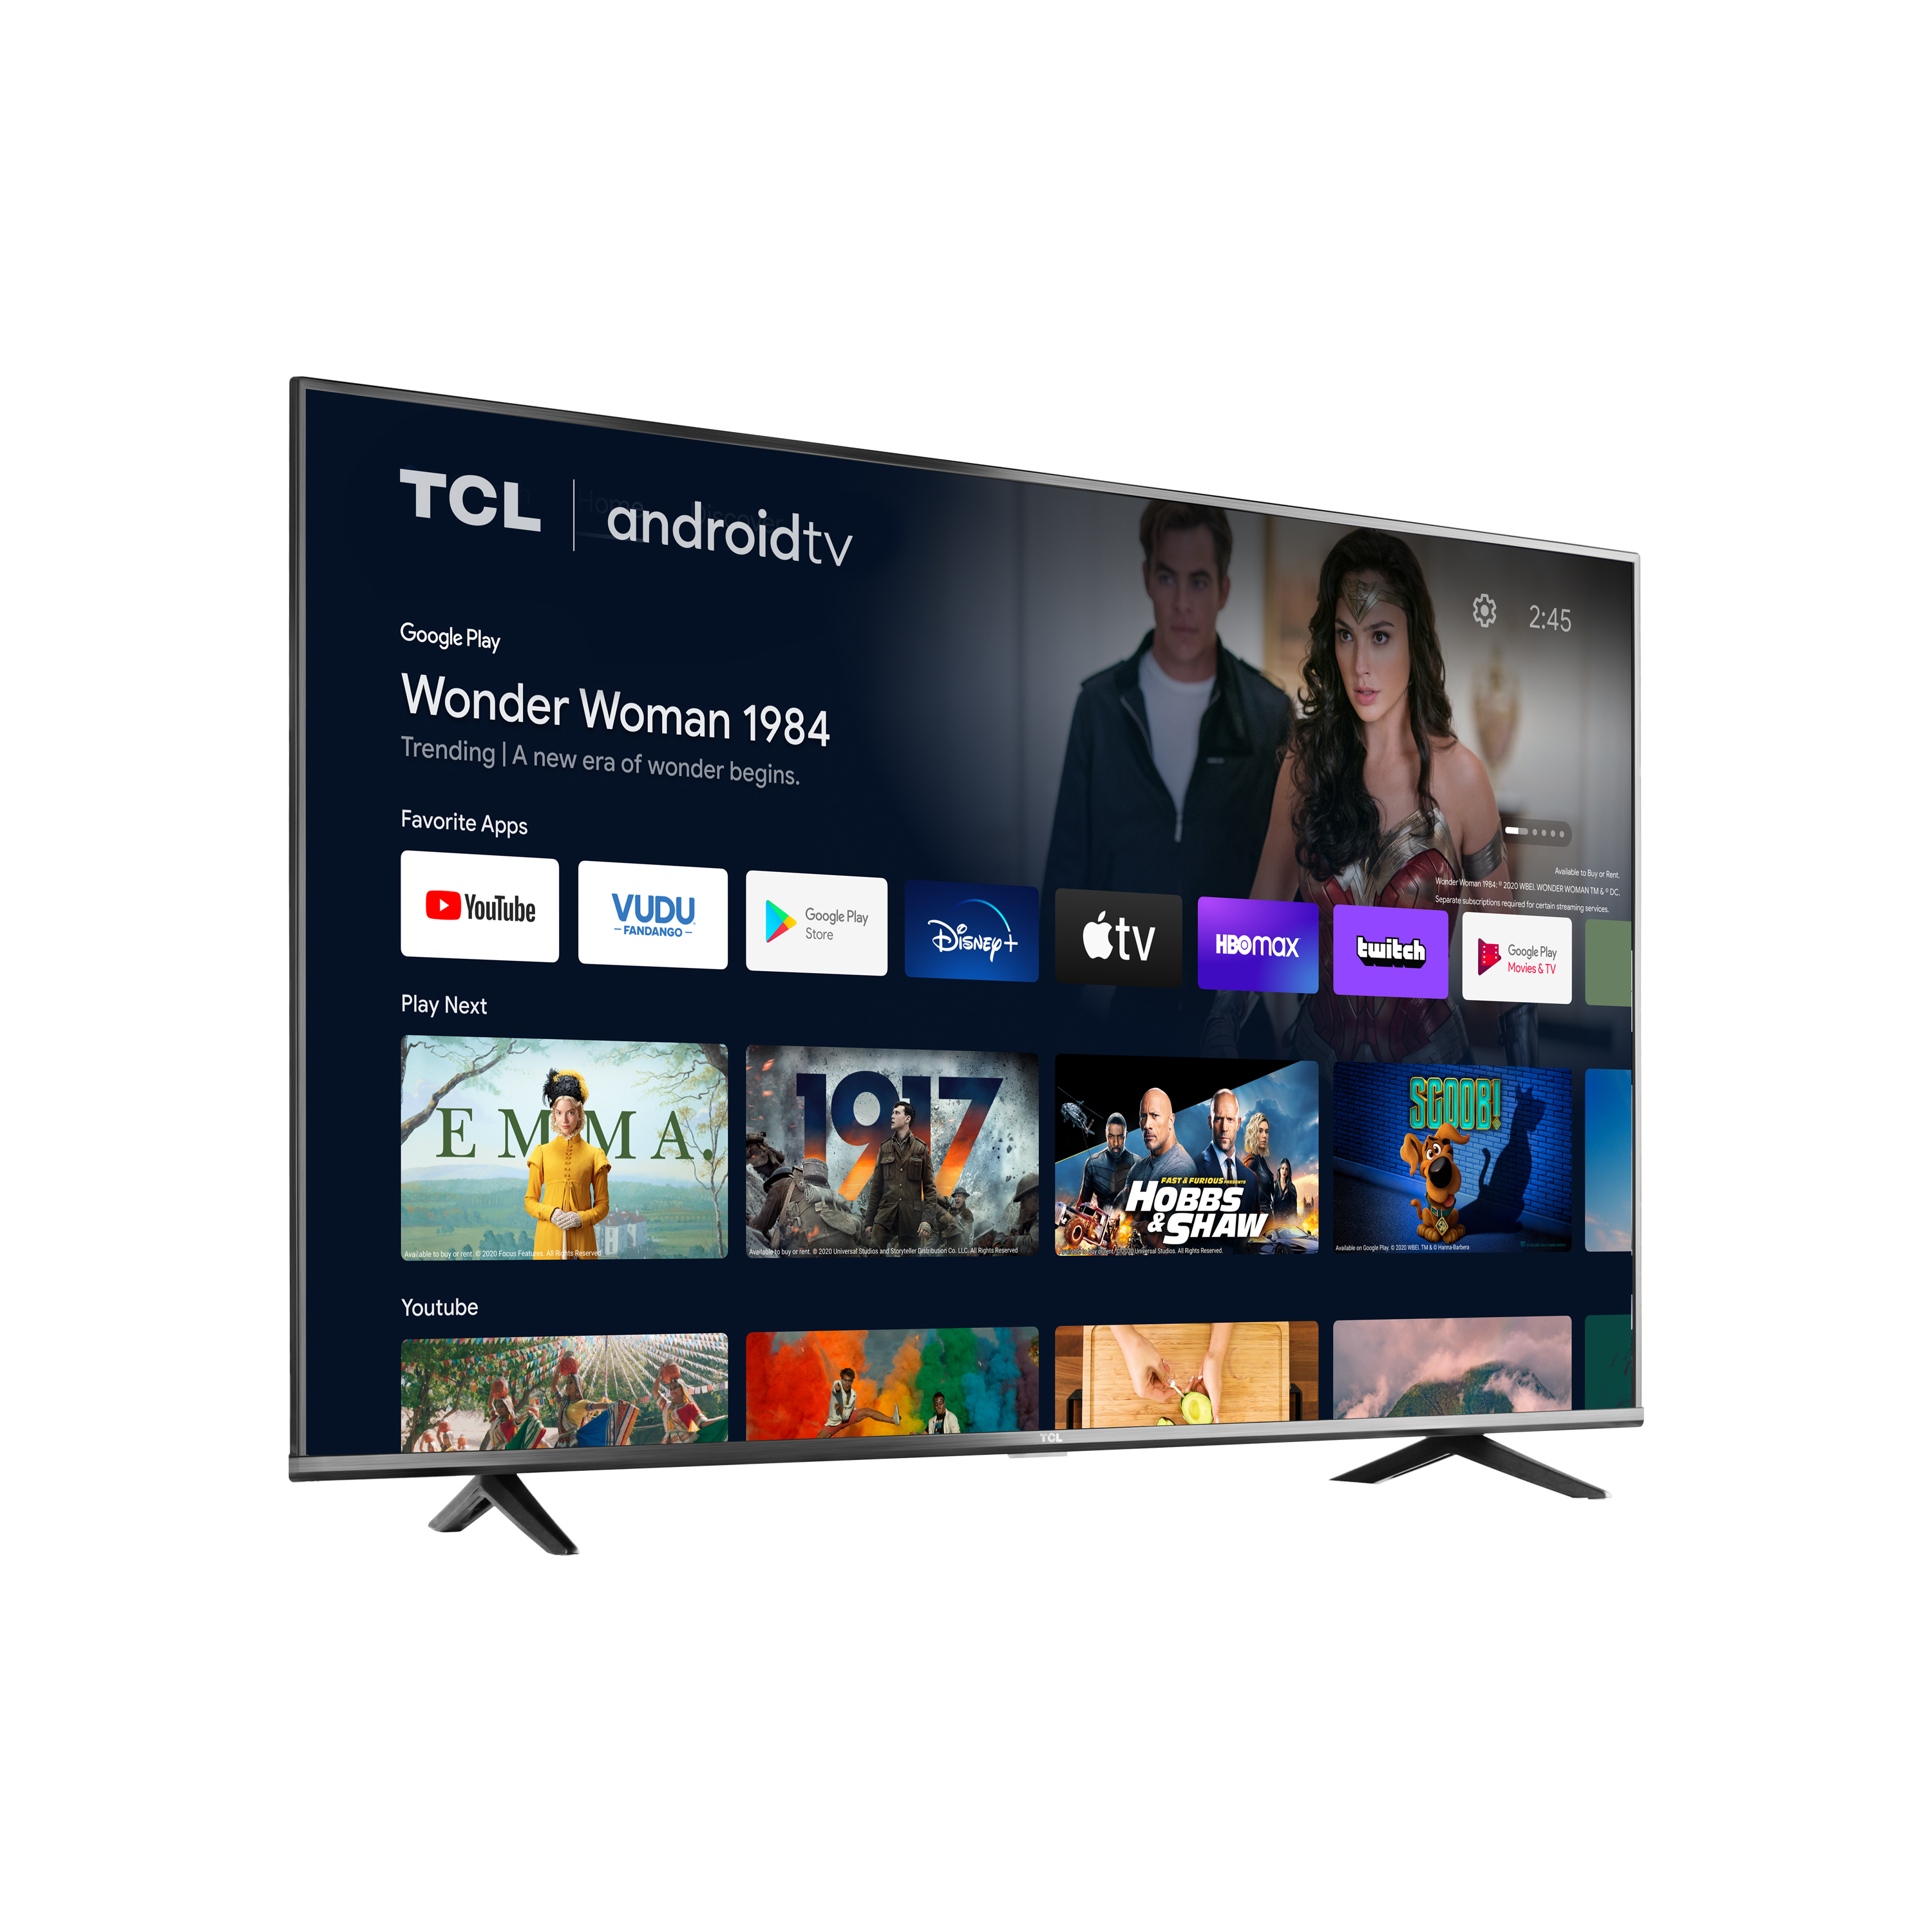 TCL 43" Class 4-Series 4K UHD HDR LED Smart Android TV - 43S434 - image 3 of 11